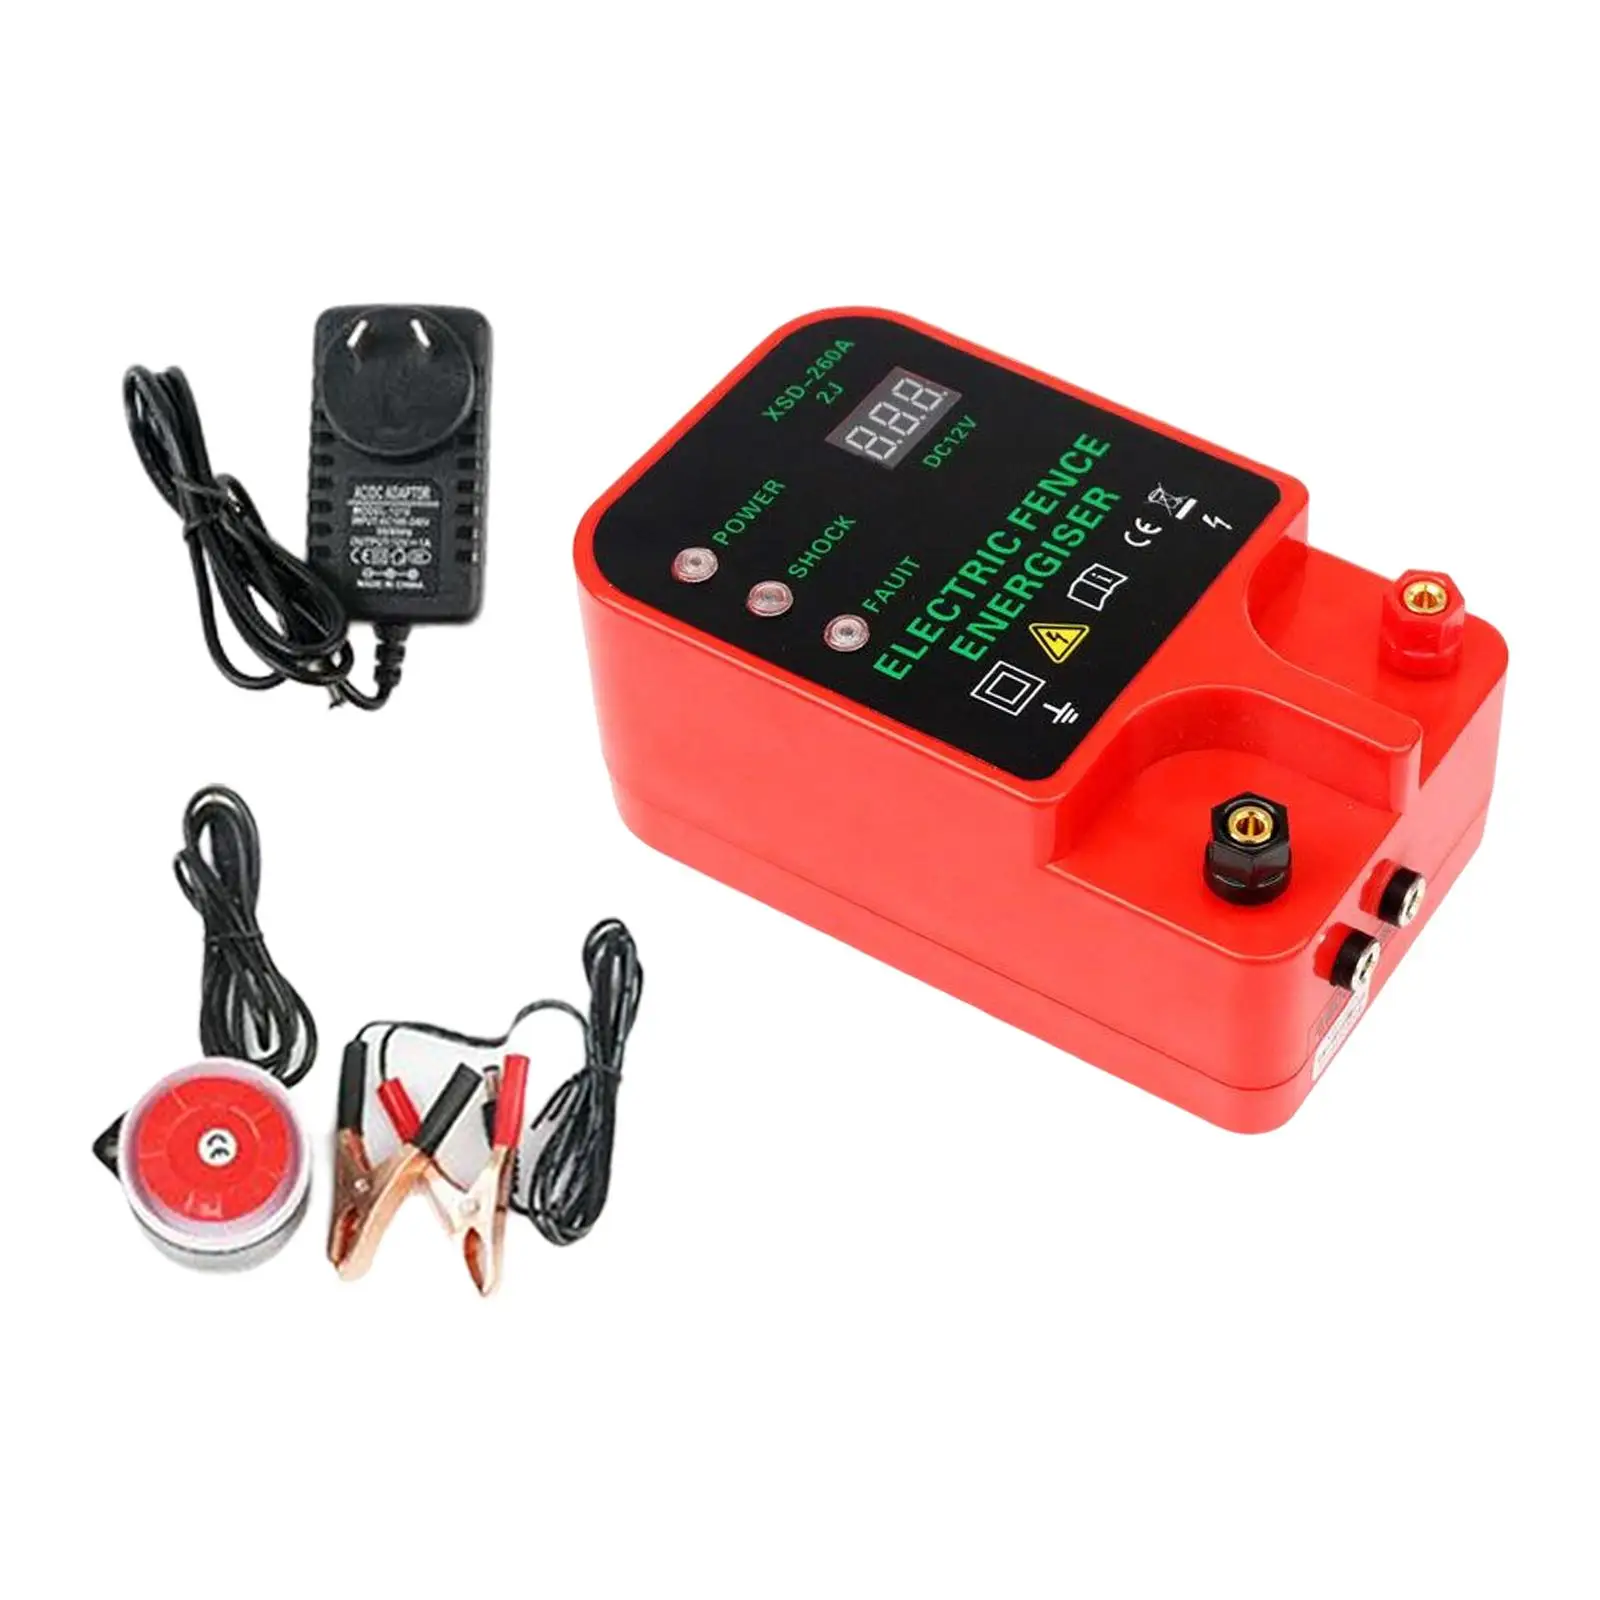 Portable Electric Fence Energizer LCD Display Waterproof High Voltage 10km Rechargeable for Horse Cattle Sheep Fence AU